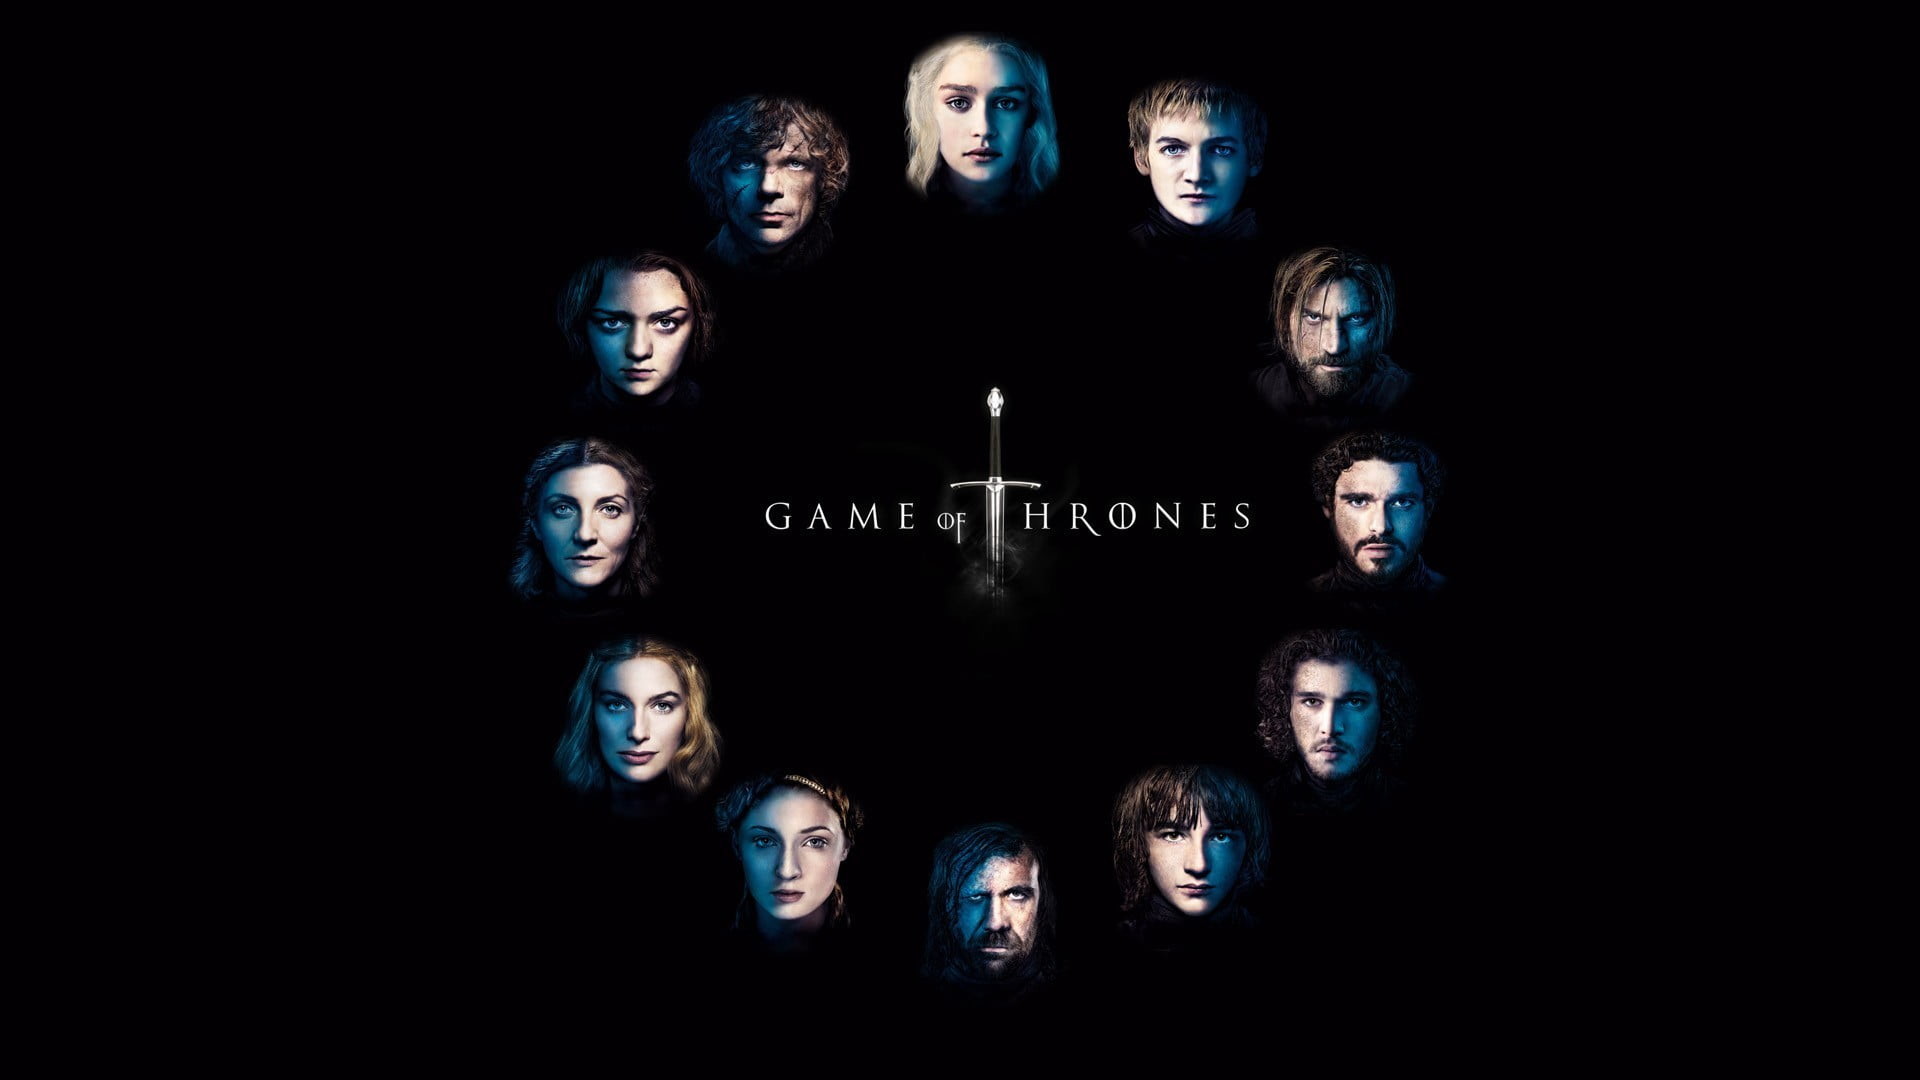 1920x1080 game of thrones wallpaper hd #410742